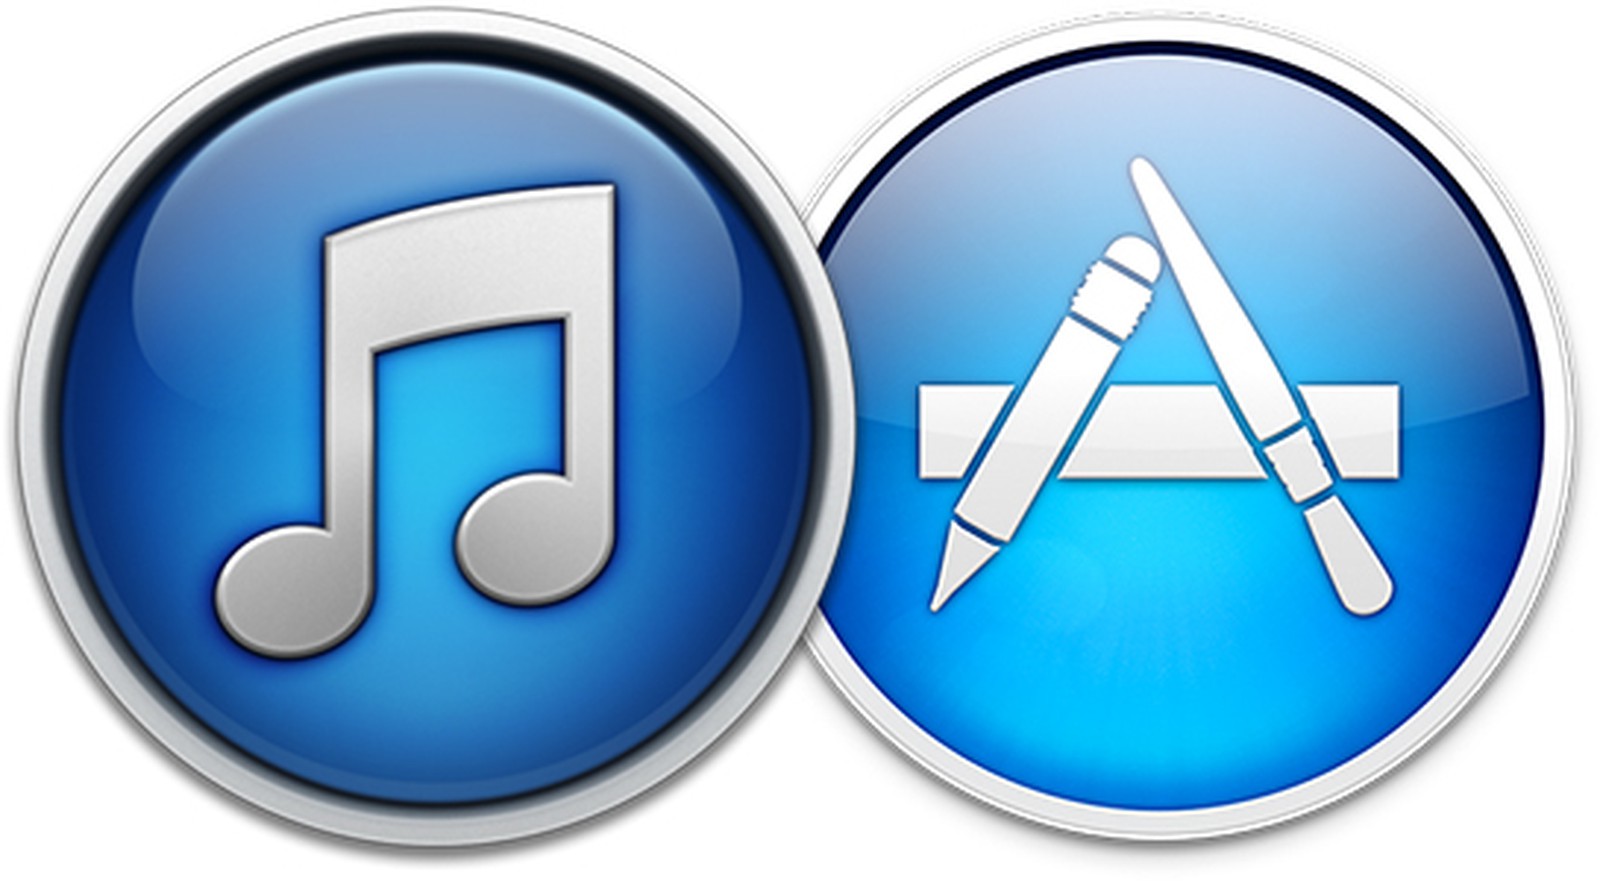 old version of itunes for mac